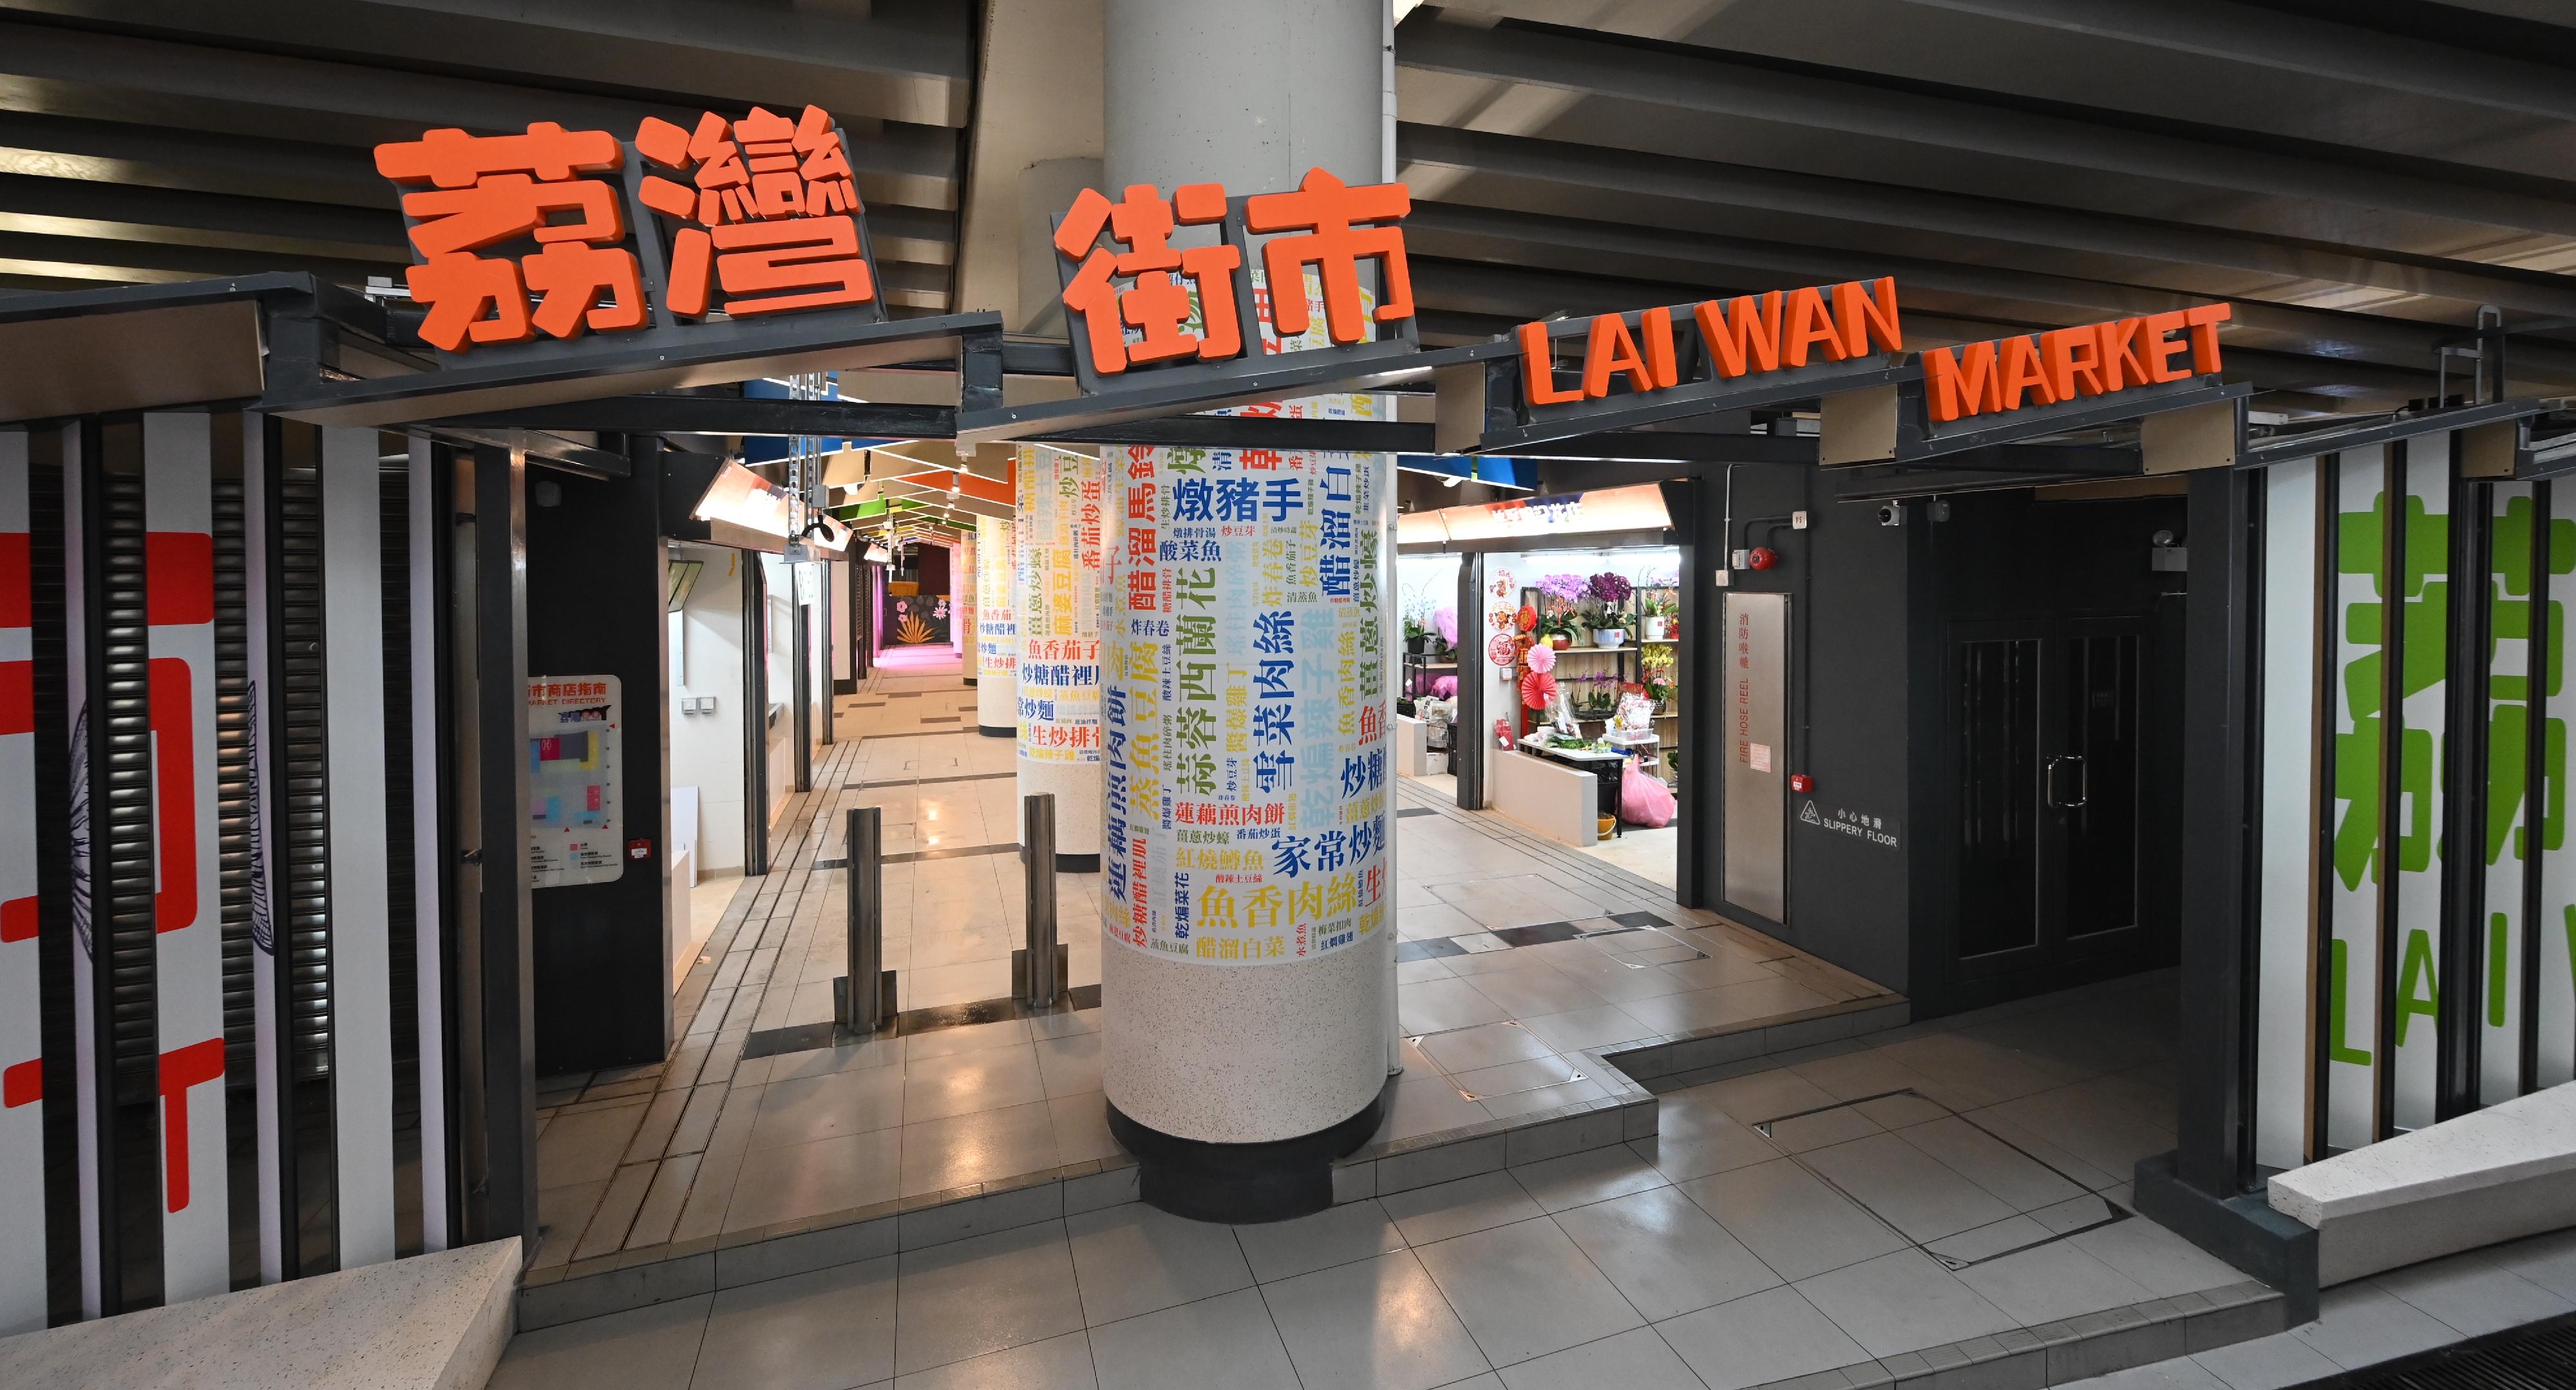 A spokesman for the Food and Environmental Hygiene Department said today (February 1) that the Lai Wan Market, after an overhaul, is ready to commence operation in phases. The market will start business tomorrow (February 2) to let tenants and patrons experience the new environment and facilities of the market.